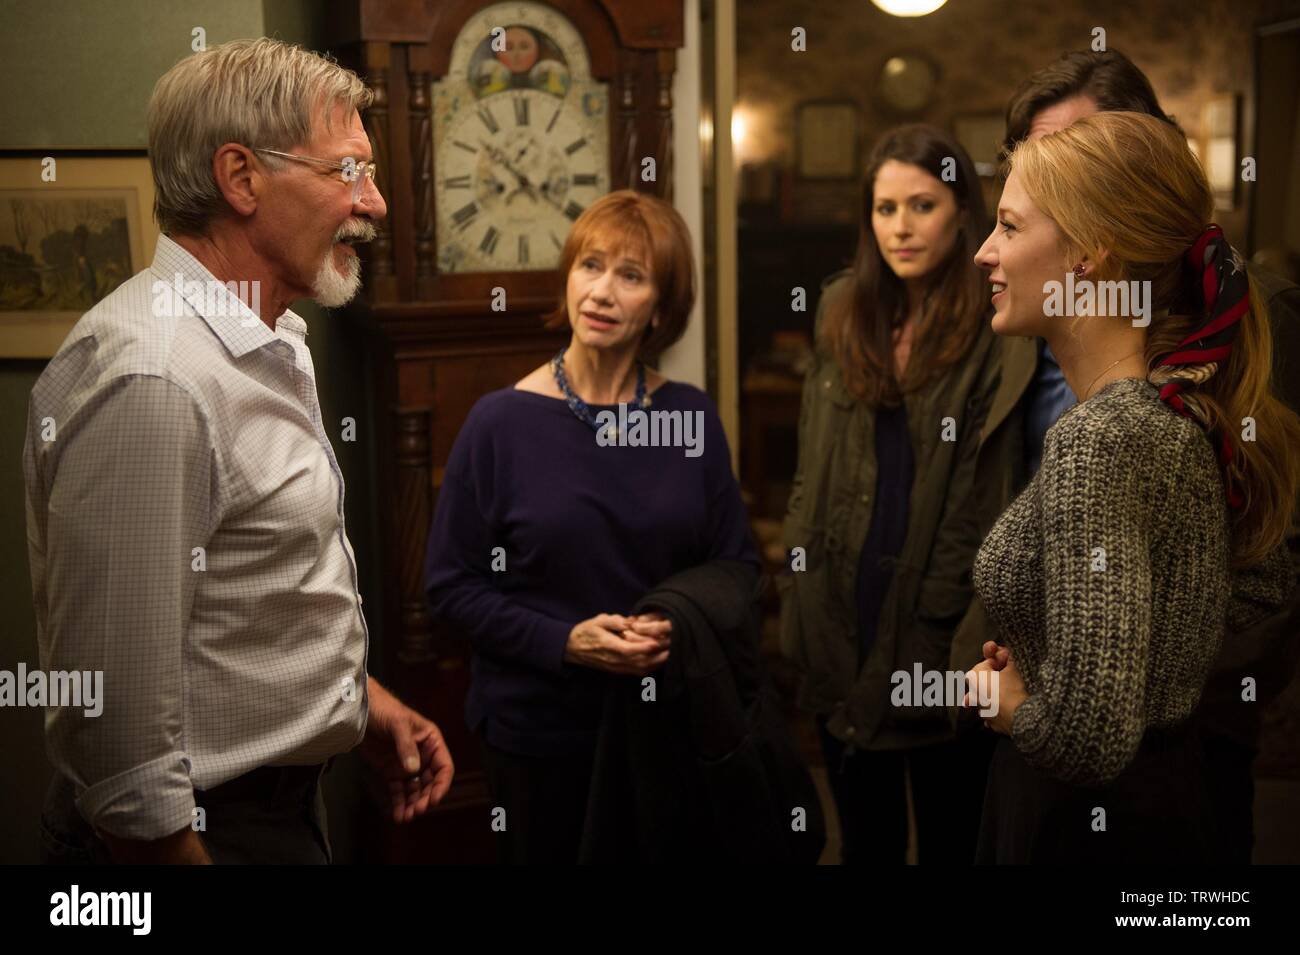 HARRISON FORD , KATHY BAKER , BLAKE LIVELY and AMANDA CREW in THE AGE OF ADALINE (2015). Copyright: Editorial use only. No merchandising or book covers. This is a publicly distributed handout. Access rights only, no license of copyright provided. Only to be reproduced in conjunction with promotion of this film. Credit: LAKESHORE ENTERTAINMENT / PERA, DIYAH / Album Stock Photo